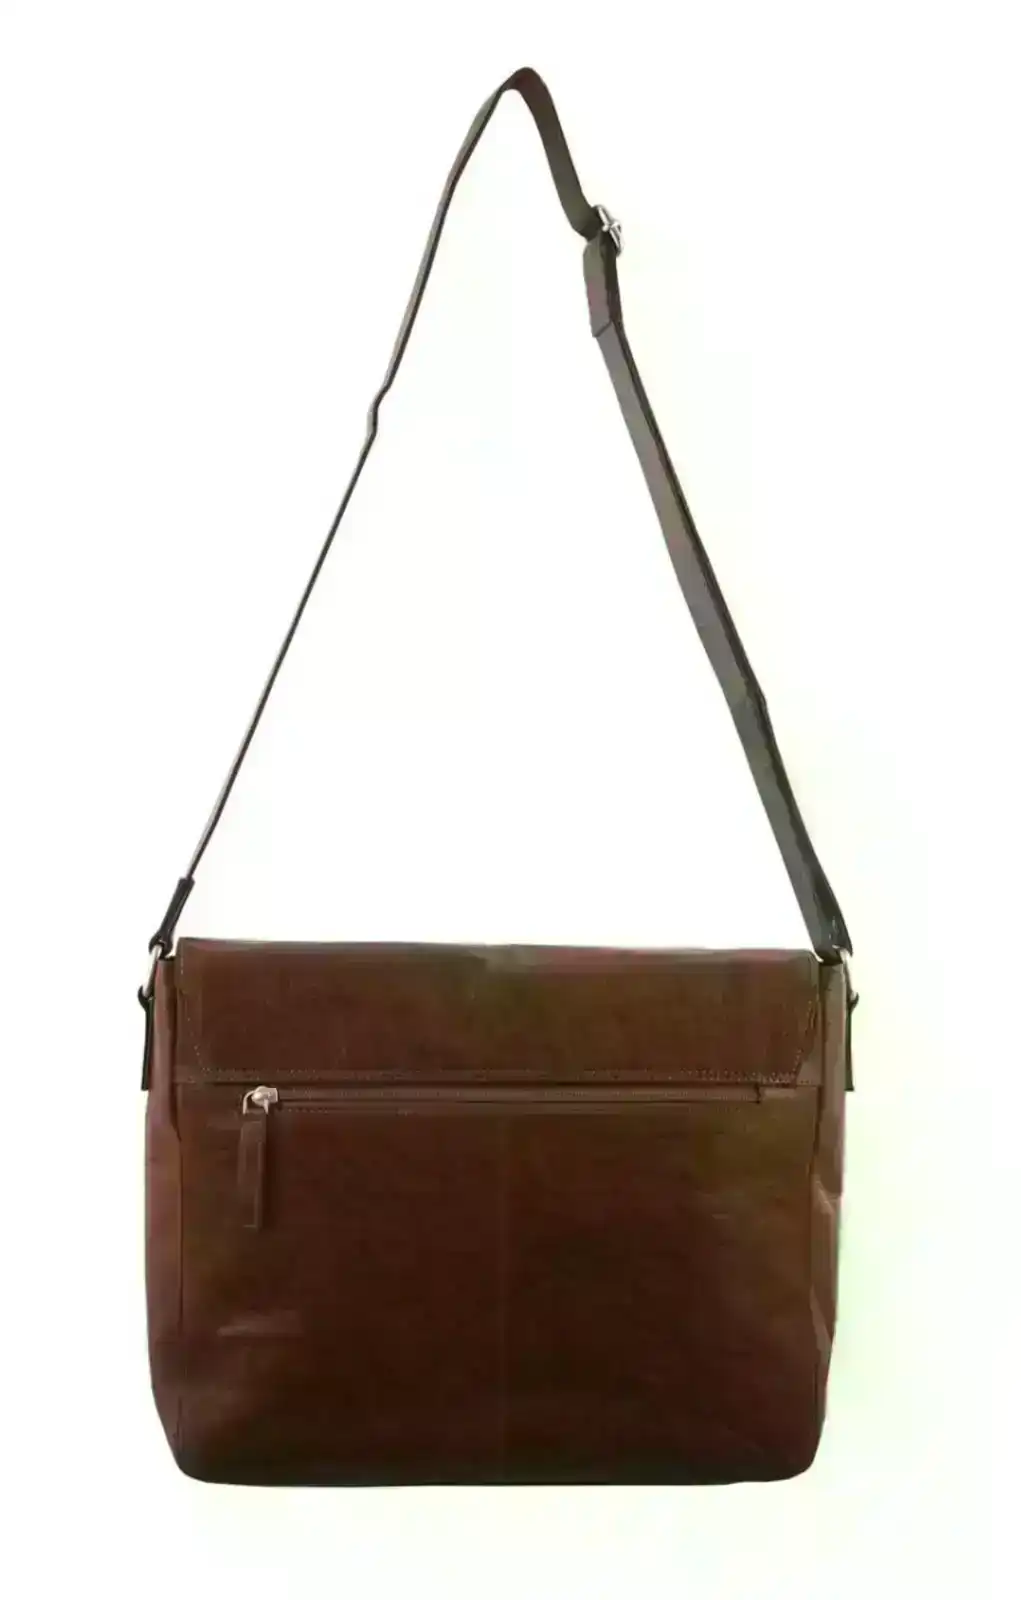 Pierre Cardin Rustic Leather Bag Computer Messenger Business Travel - Brown